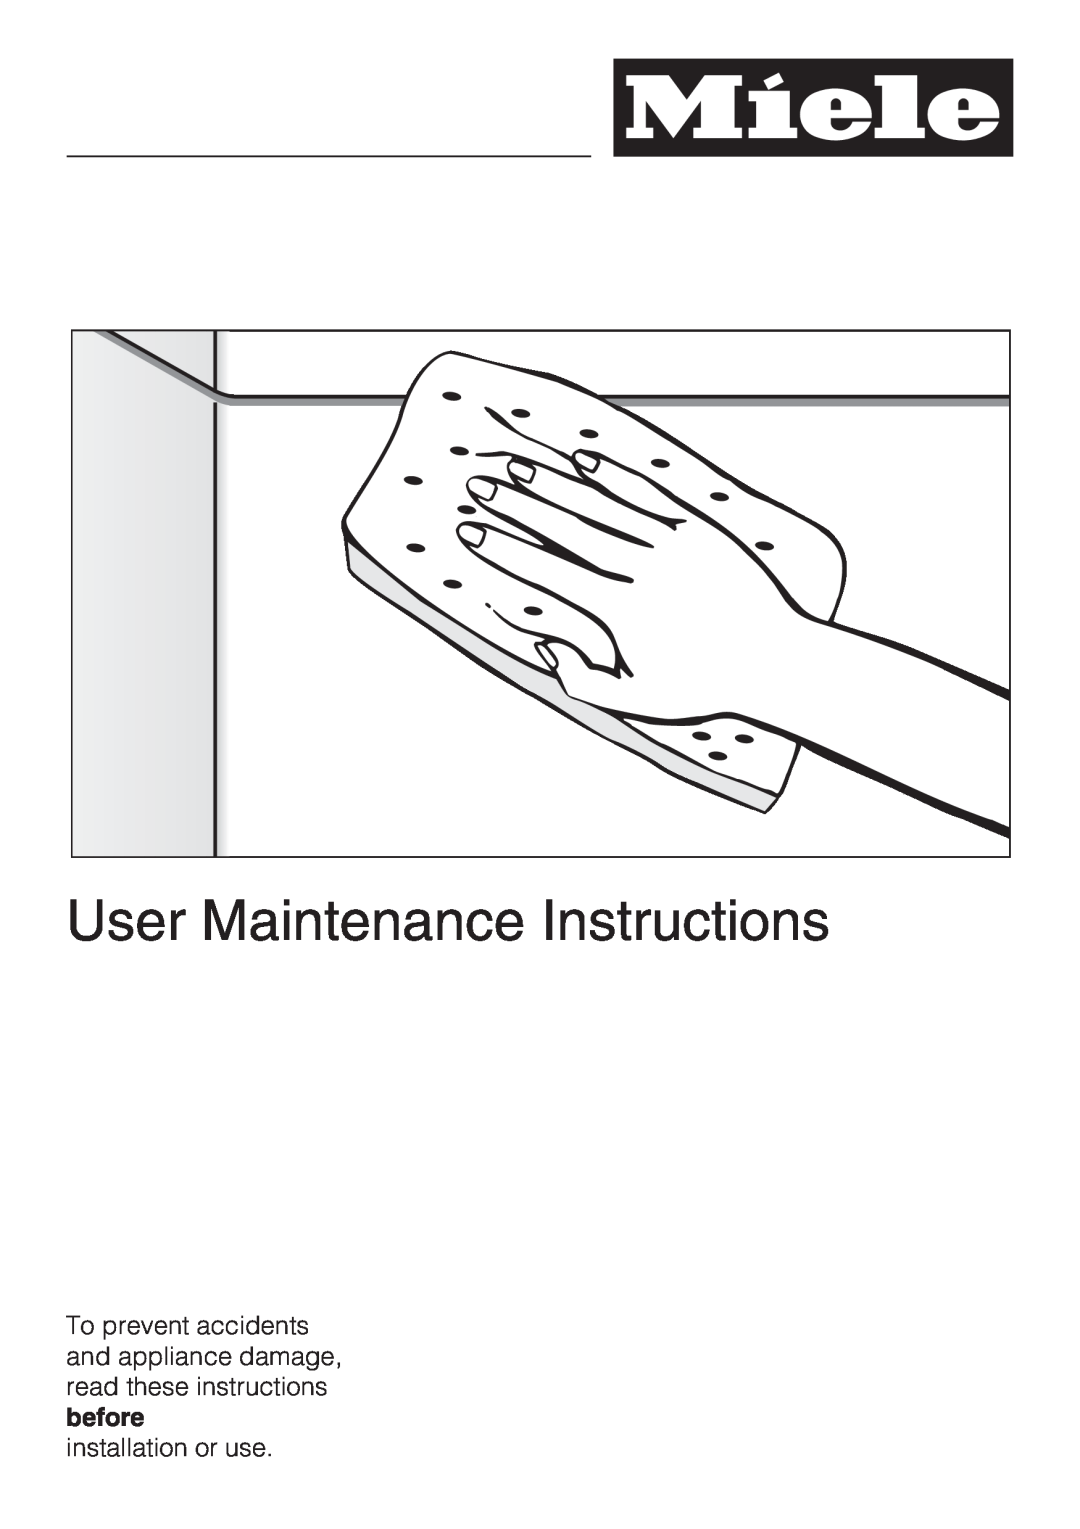 Miele G 5700, G 5705 operating instructions User Maintenance Instructions, installation or use 